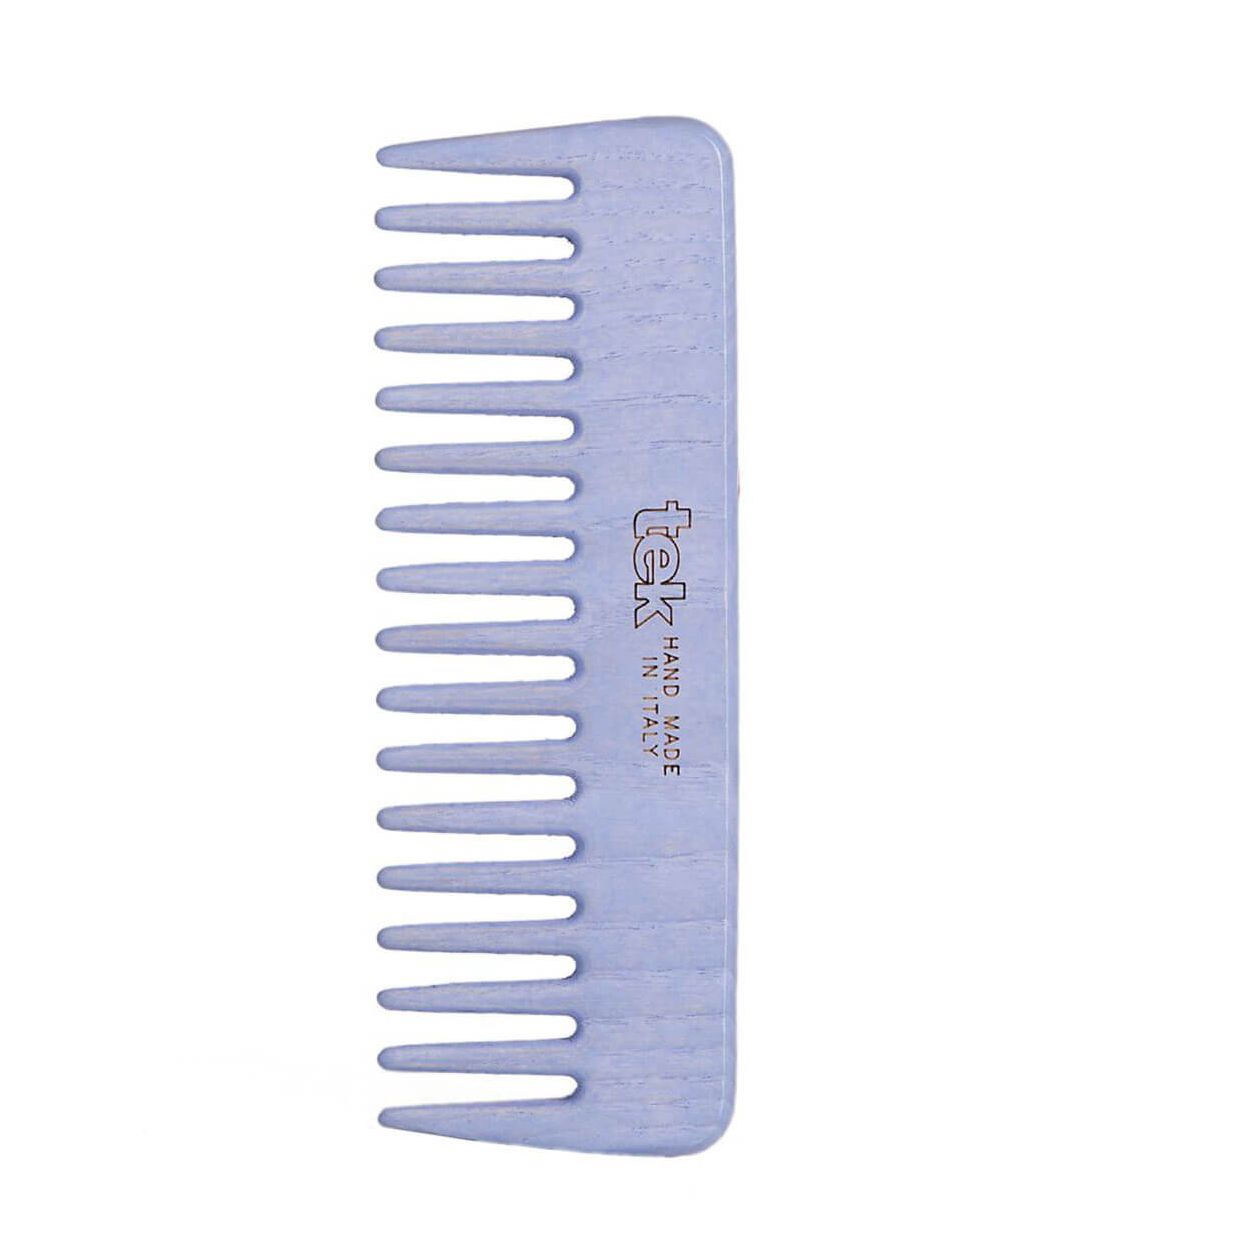 Small Ash Wood Comb with Wide Teeth